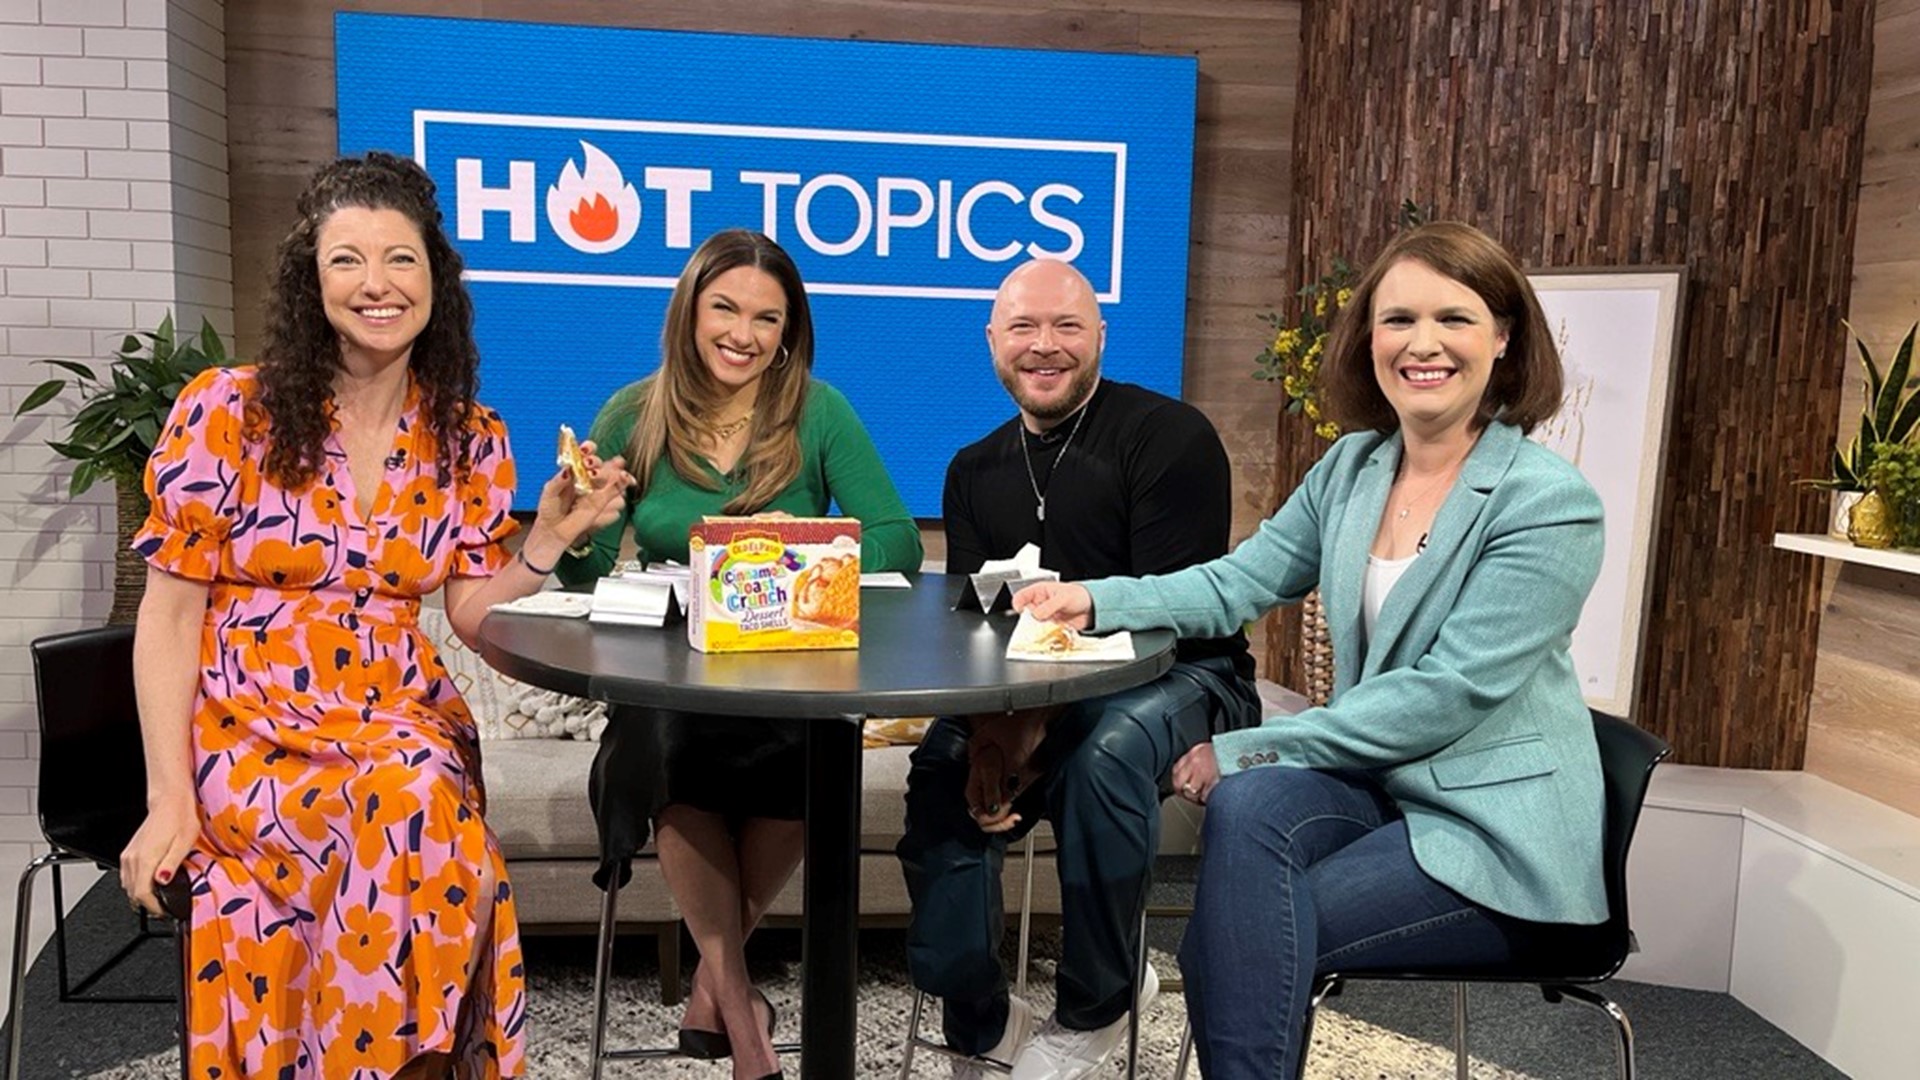 Amity is joined by Rachel Belle, Travis Holp and producer Rebecca Perry to talk new Starbucks drinks, Coachella and new Cinnamon Toast Crunch Taco Shells. #newdaynw